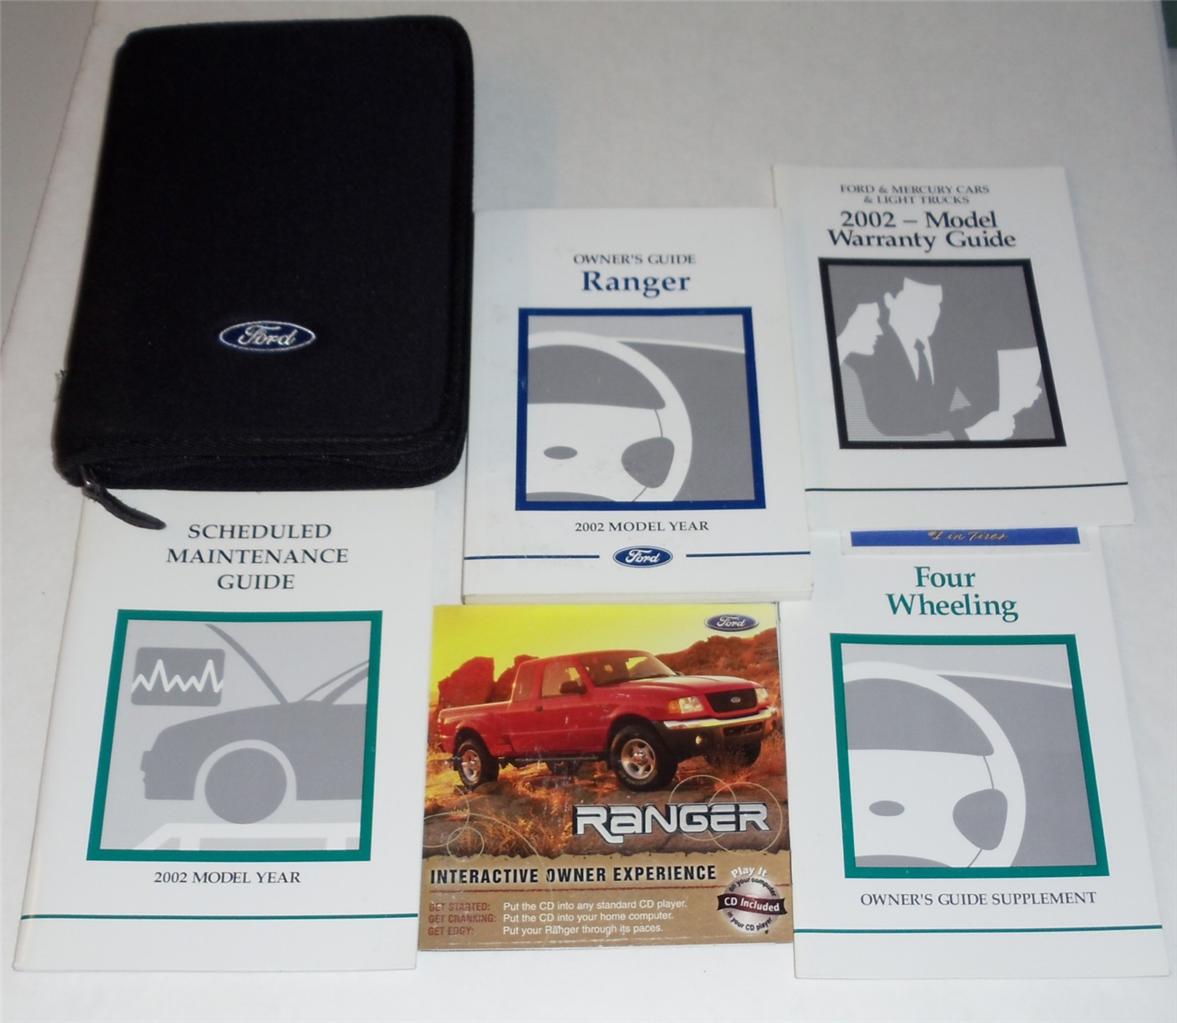 2000 Ford ranger owners manual online #9